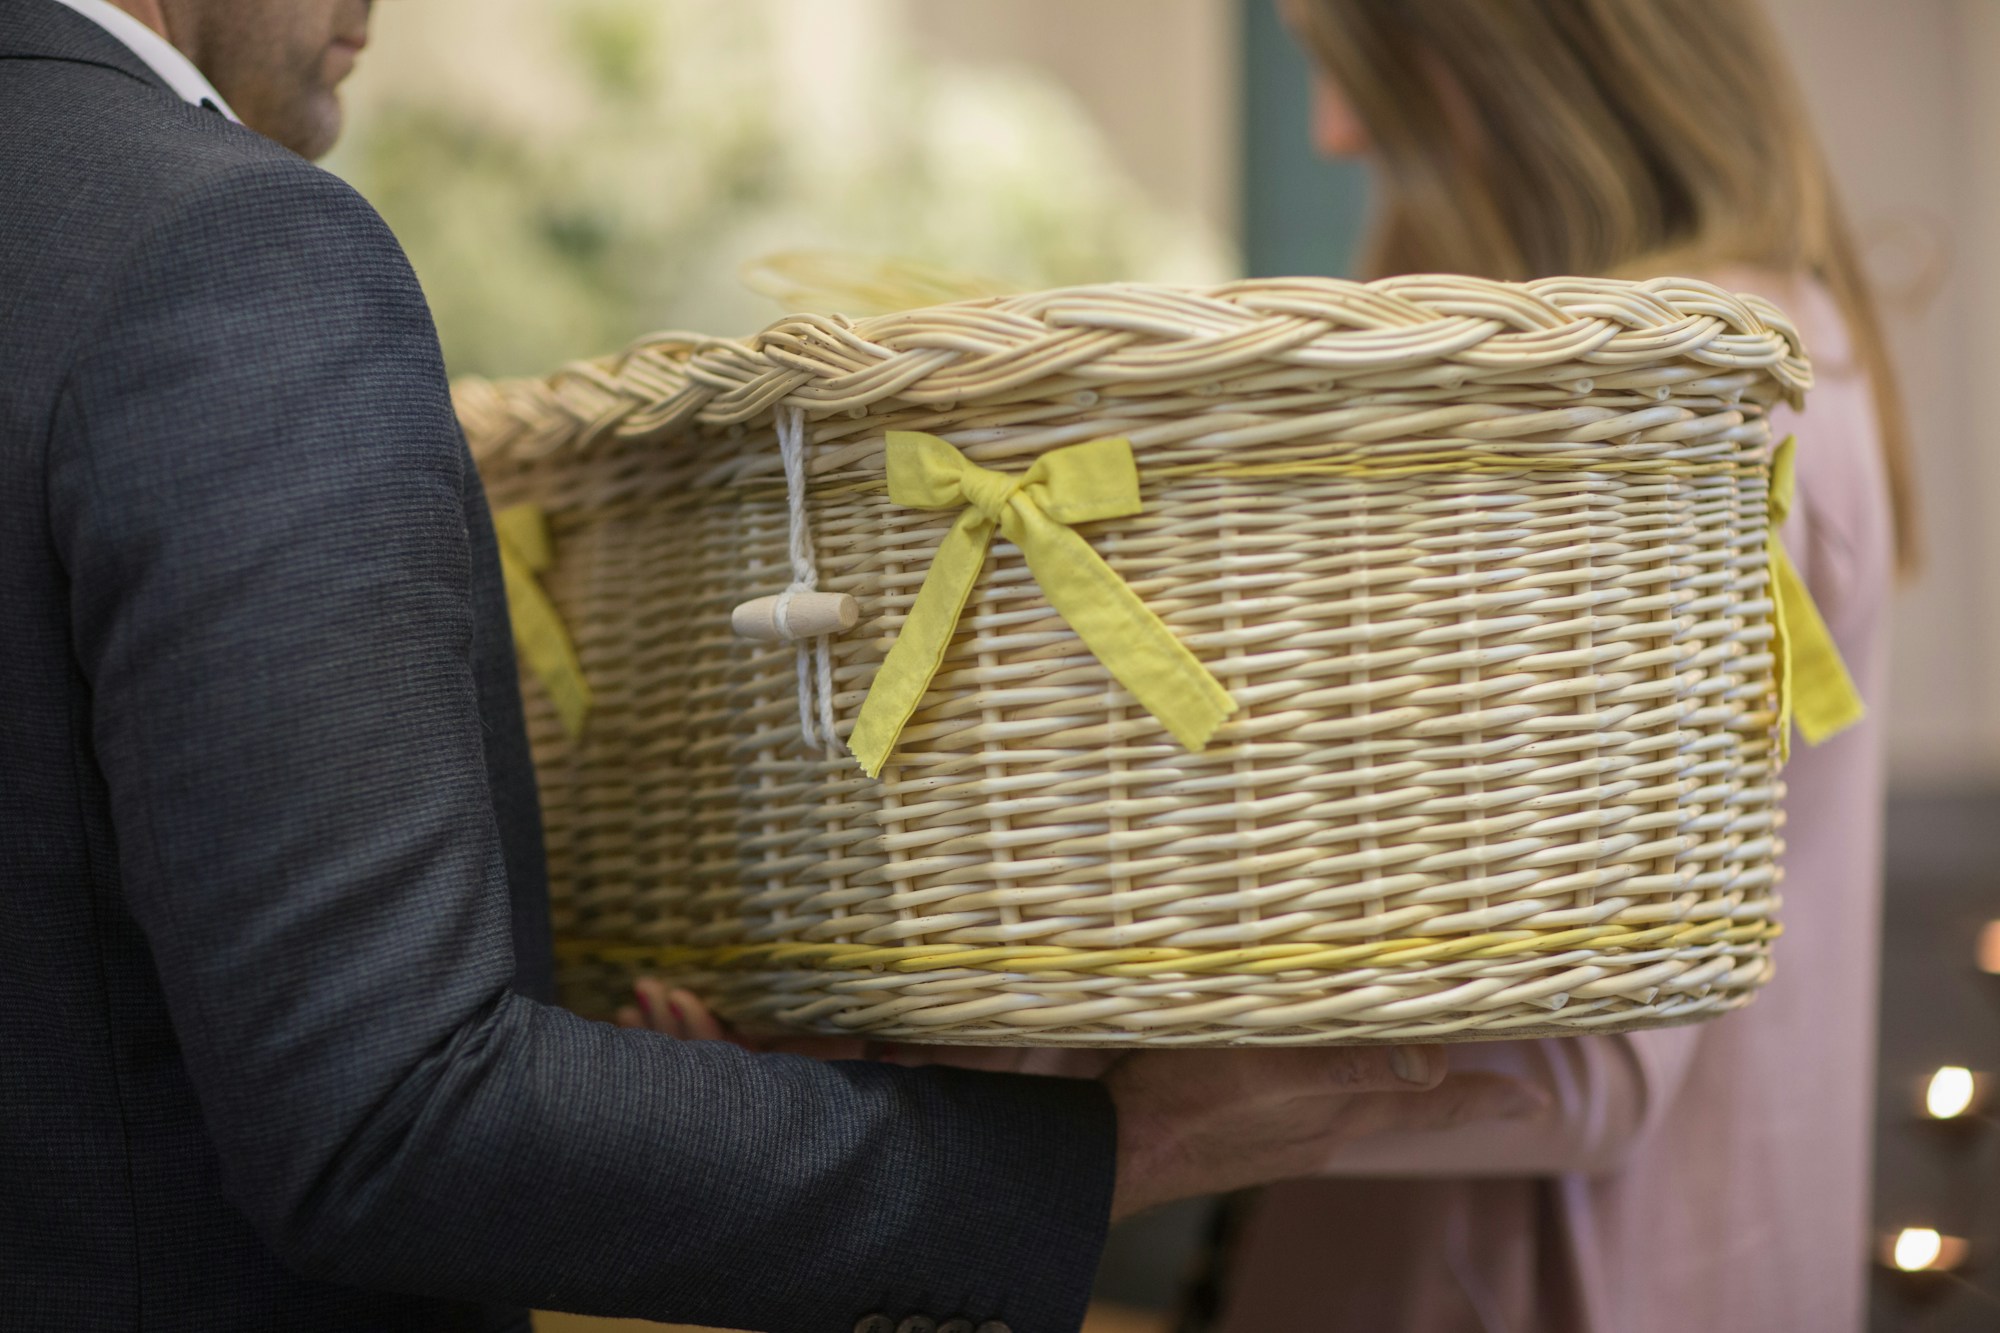 a man in a suit holding a wicker basket